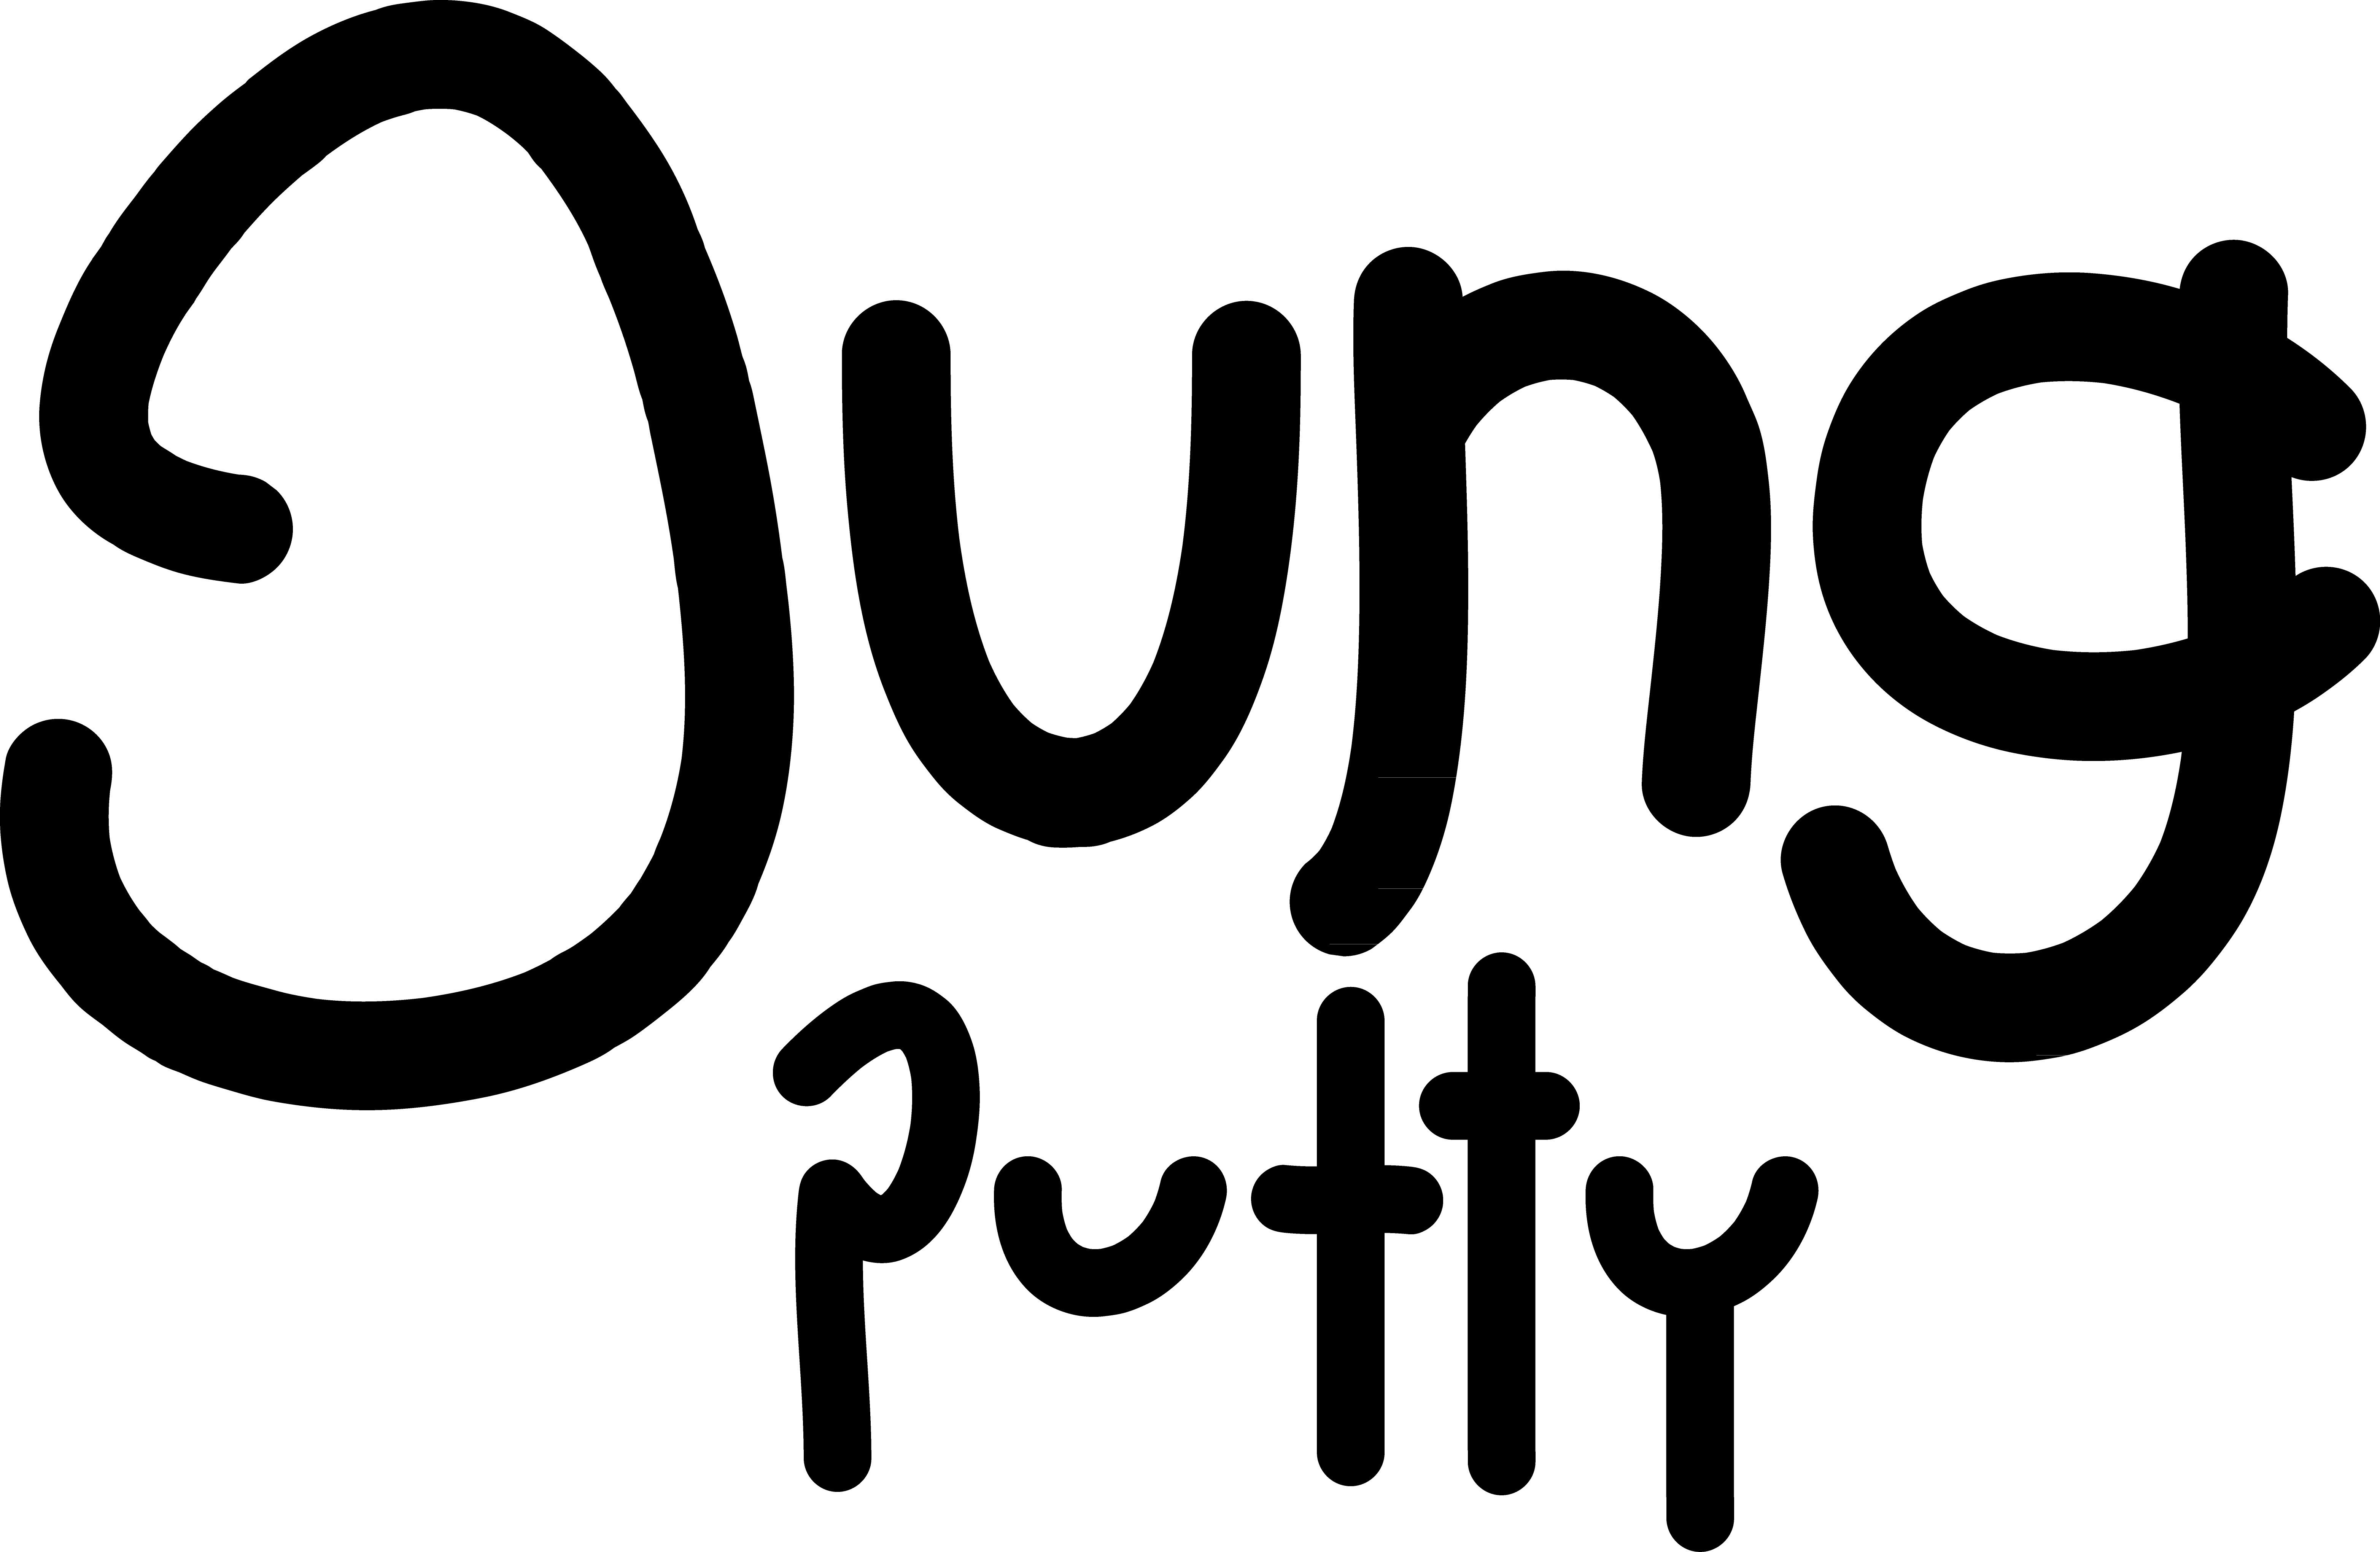 Putty Logo - JUNG PUTTY | Featuring custom t-shirts, prints, and more